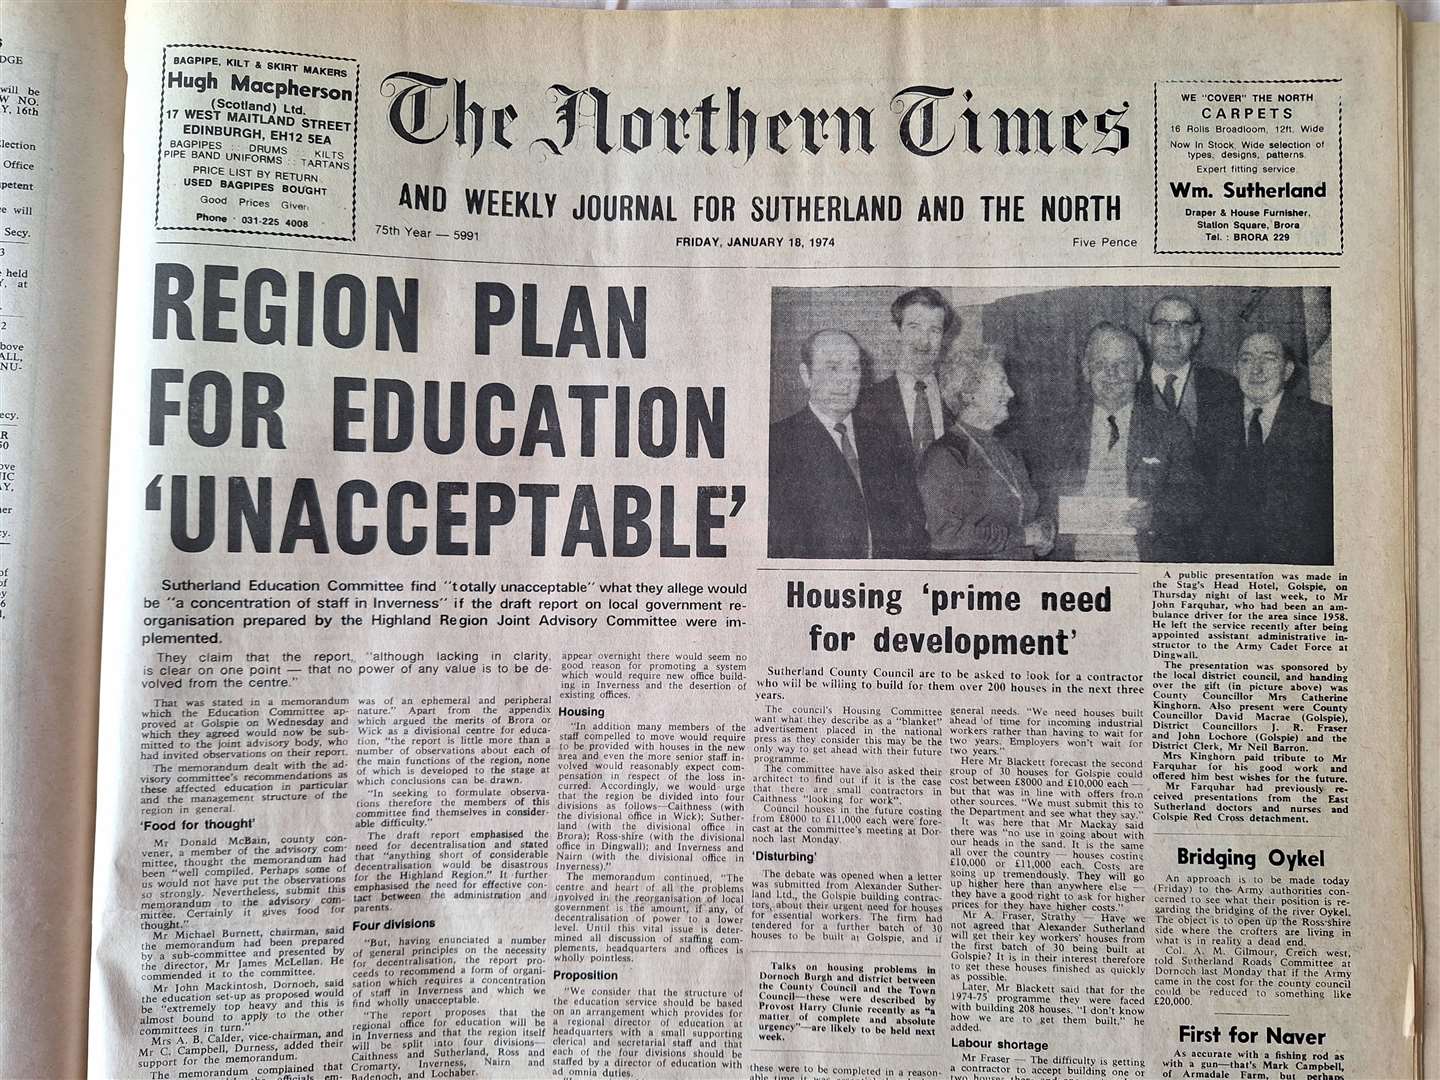 The edition of January 25, 1974.